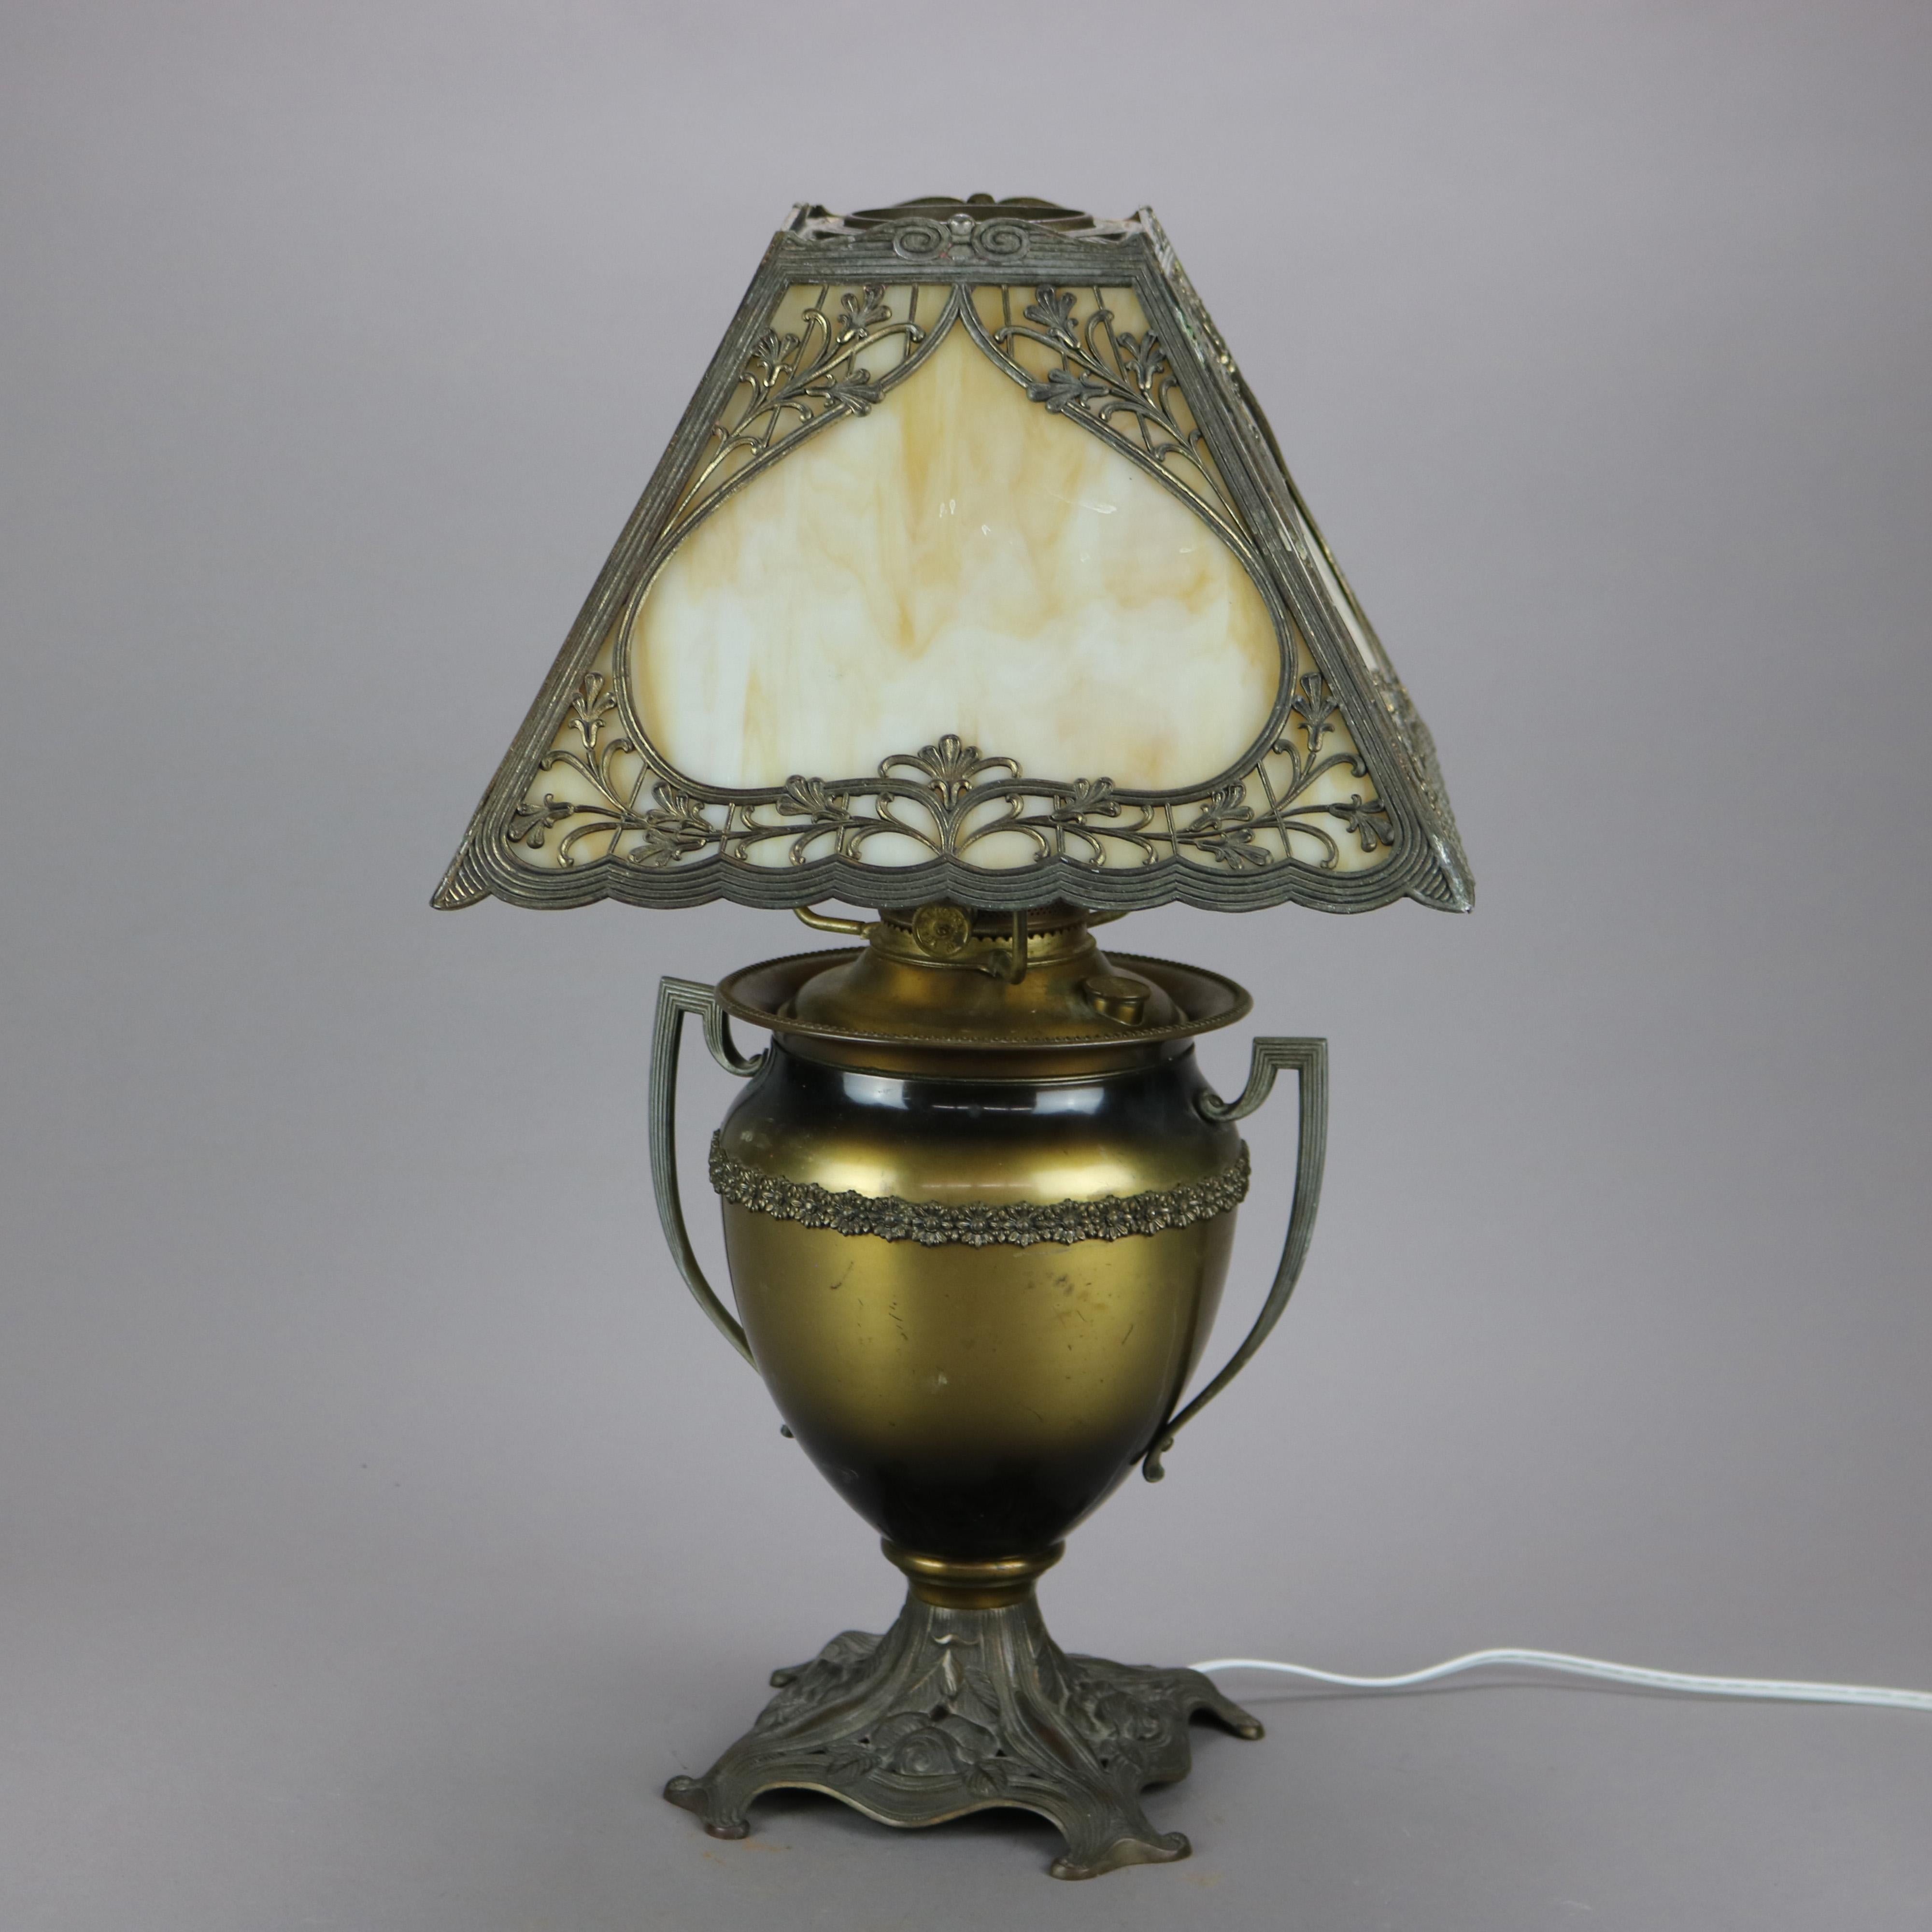 An antique Arts & Crafts table lamp in the manner of Bradley and Hubbard offers filigree shade with inverted heart reserve and housing slag glass panels over single socket urn form oil lamp base with double handles, electrified, c1910.

Measures -